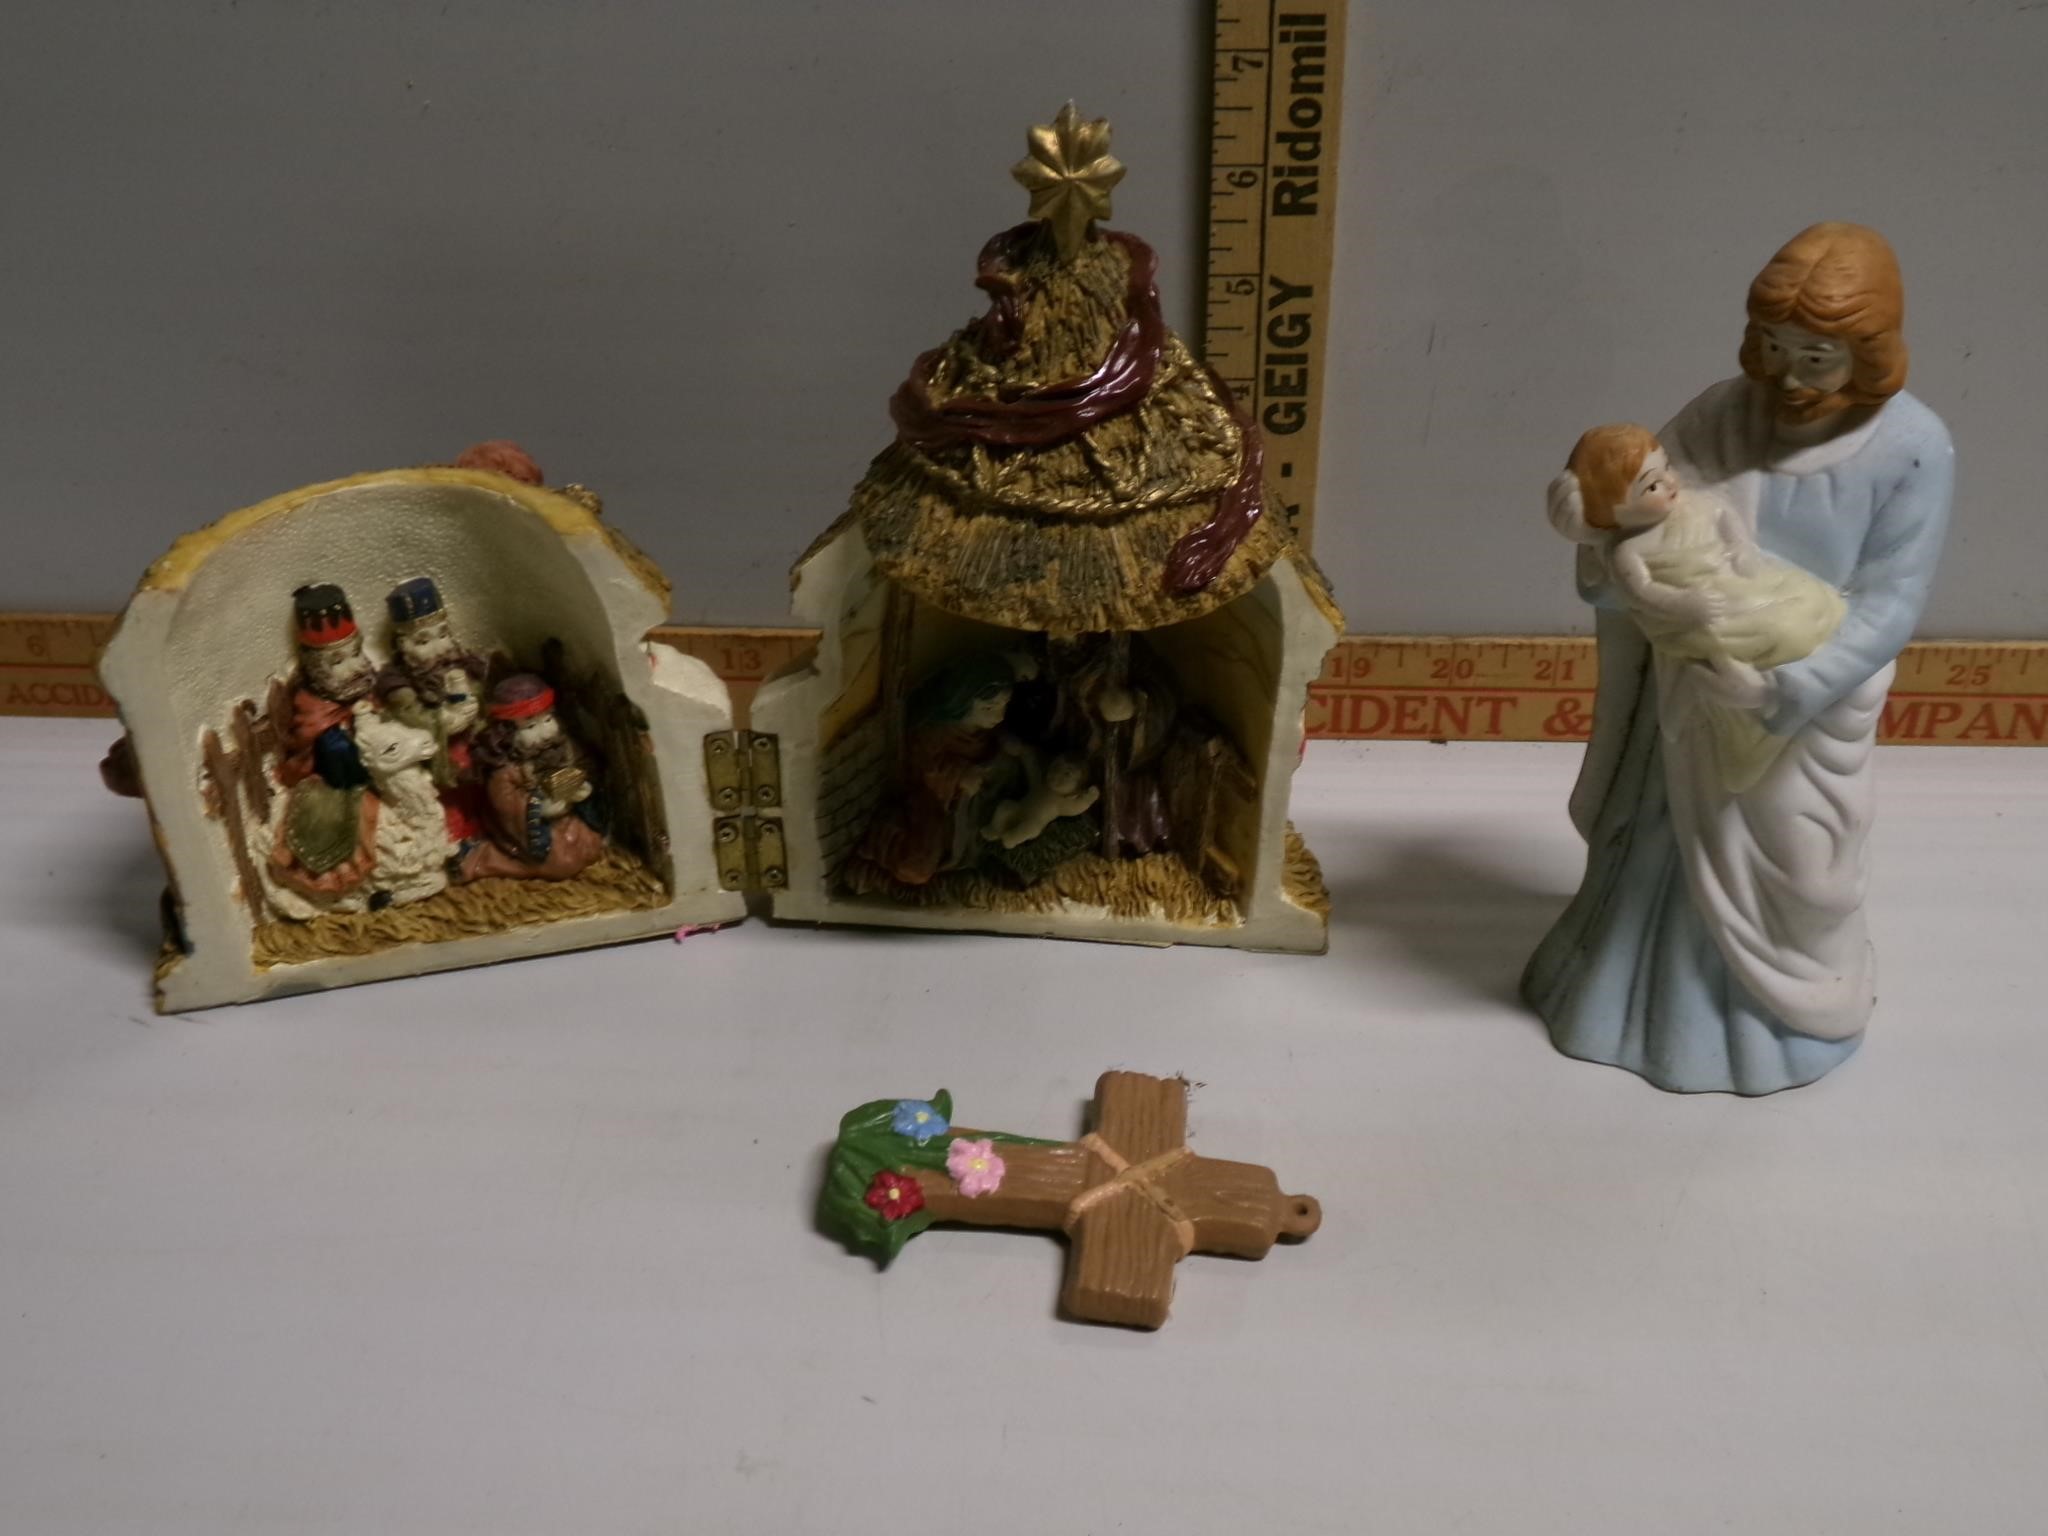 Nativity and religious items